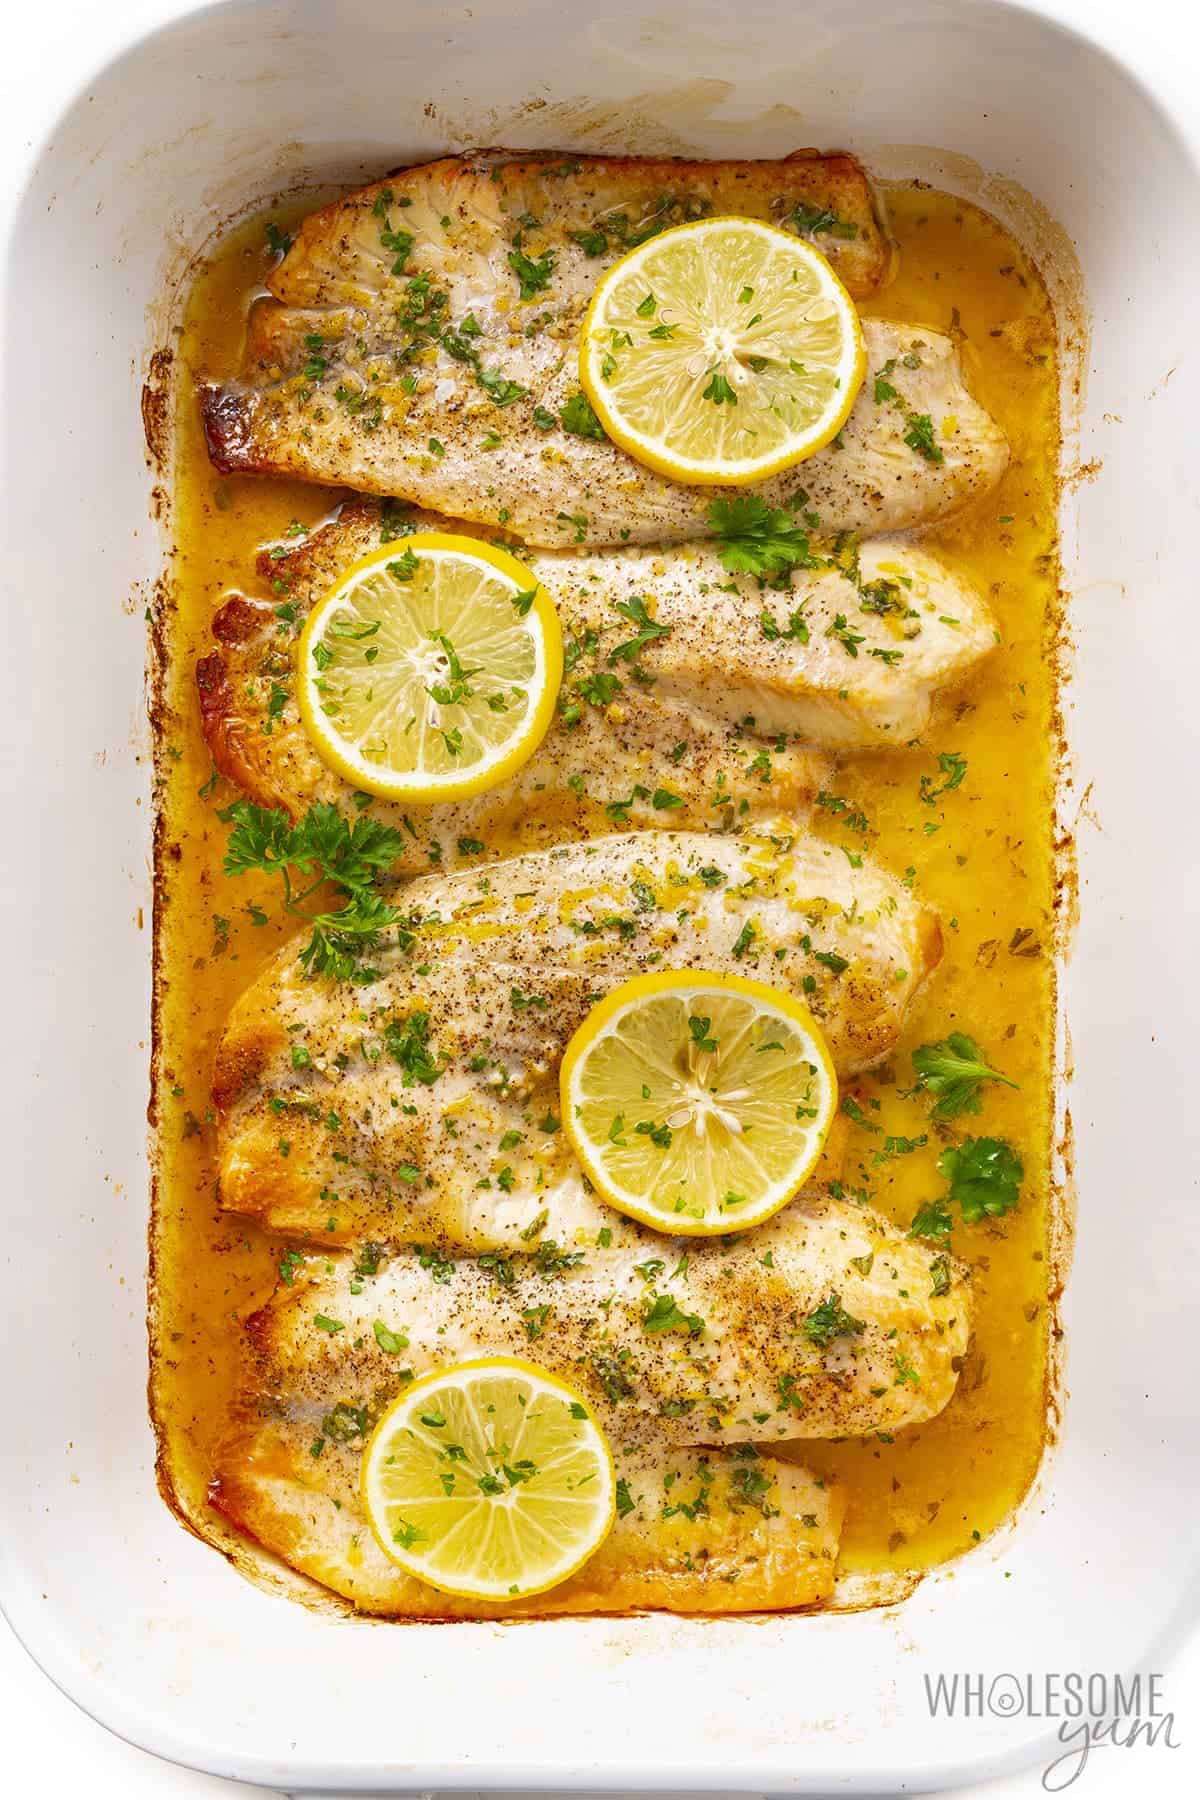 Baked tilapia recipe in a baking dish with lemon slices.